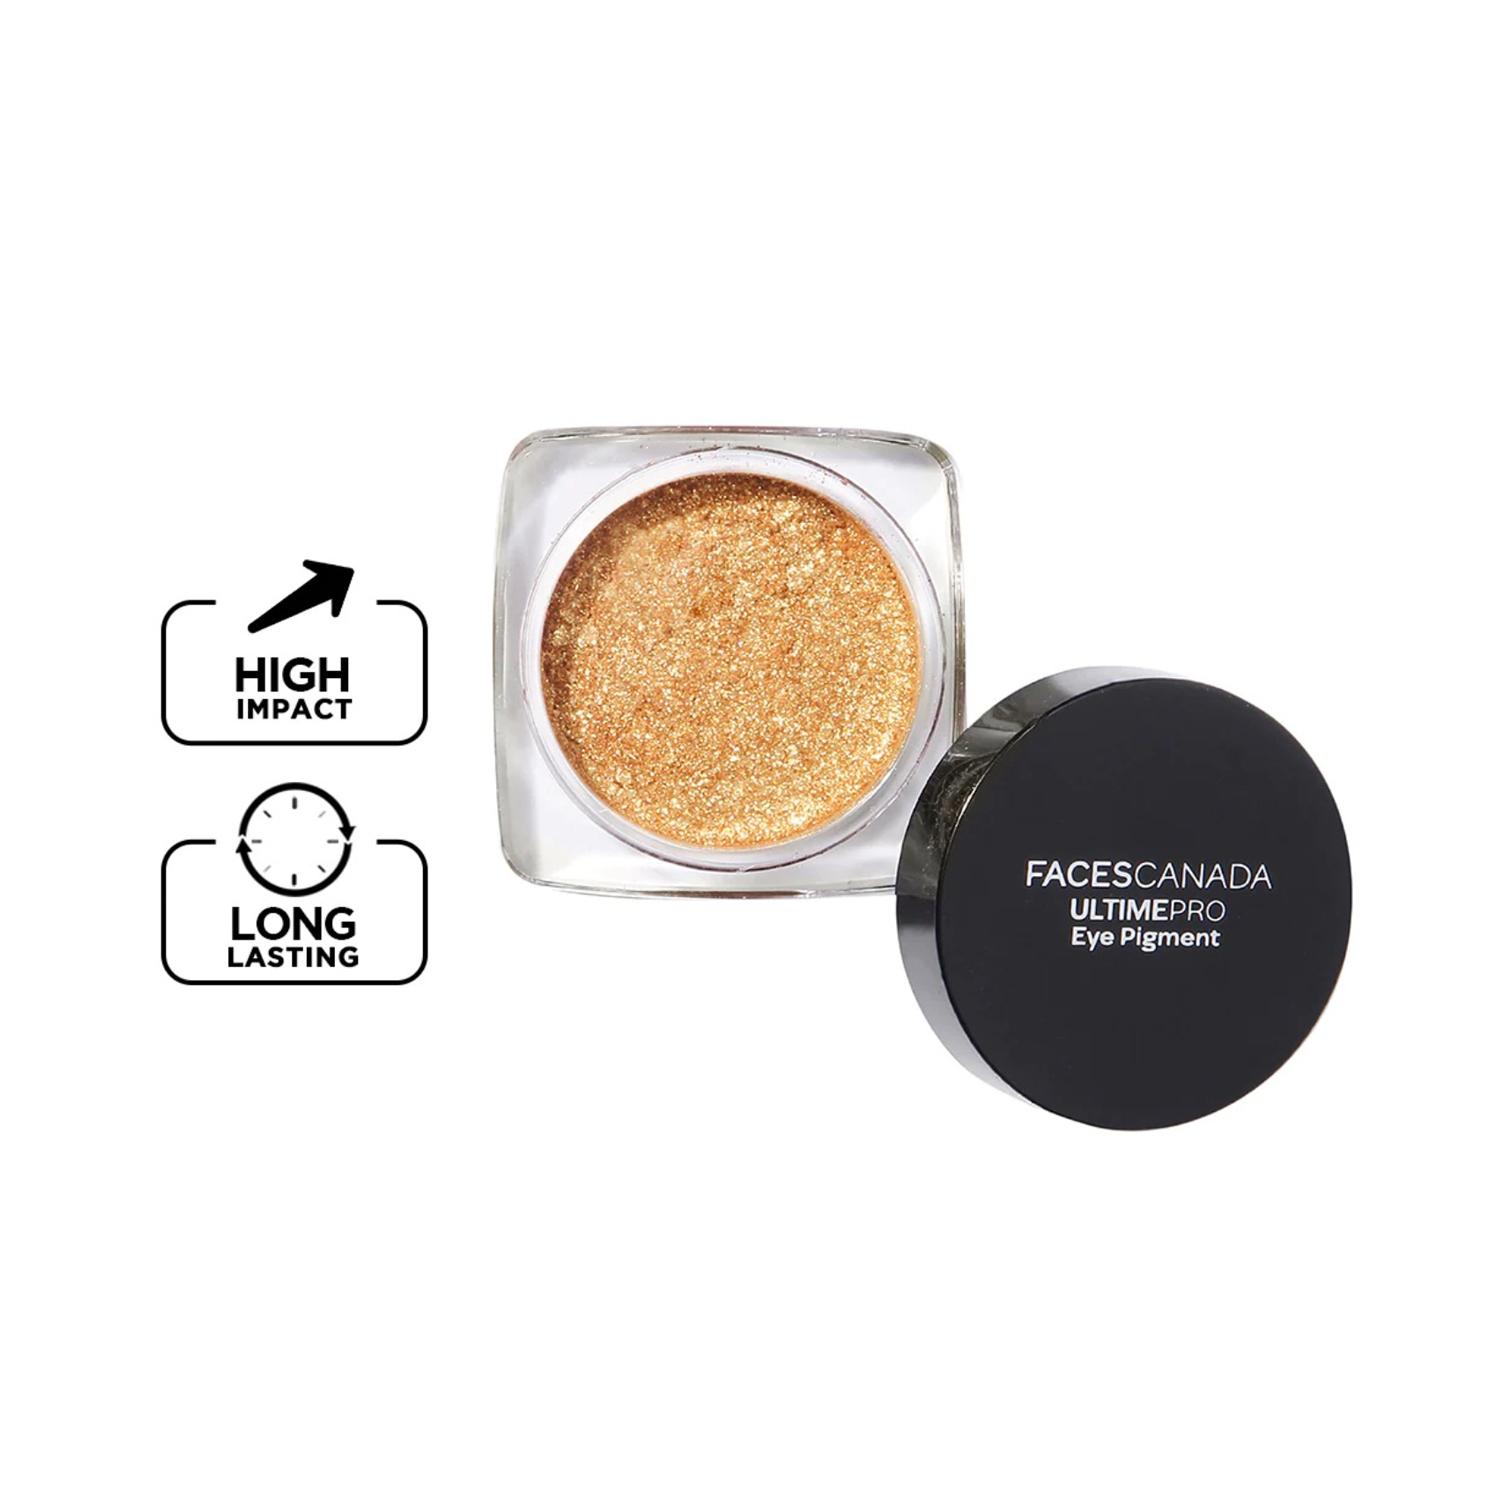 Faces Canada | Faces Canada Ultime Pro Eye Pigment - Gold 02, Shimmery Finish, Long-Lasting (1.8 g)